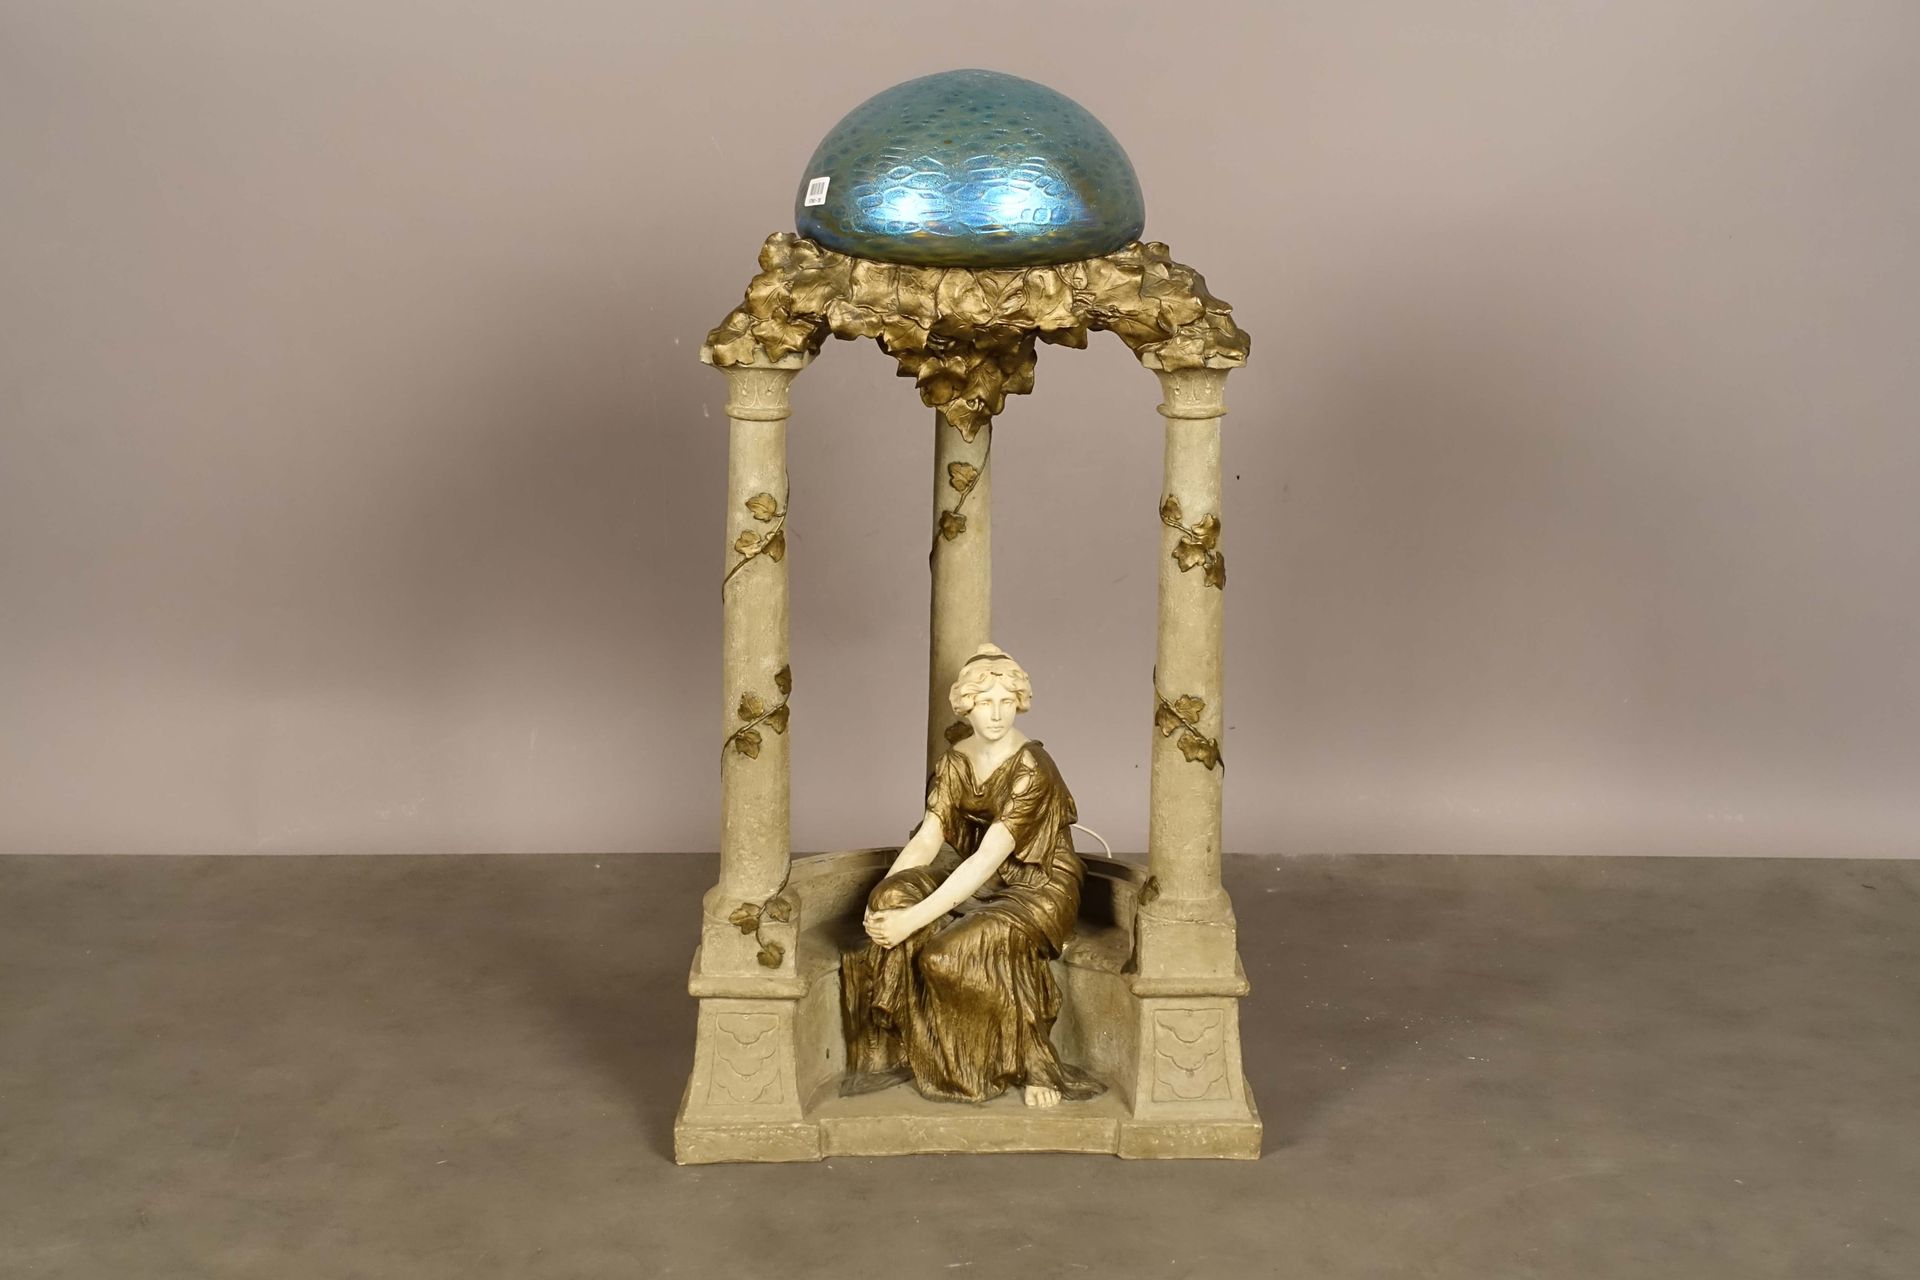 Grande lampe “Belle Epoque“. Depicting a pensive young woman, seated in a garden&hellip;